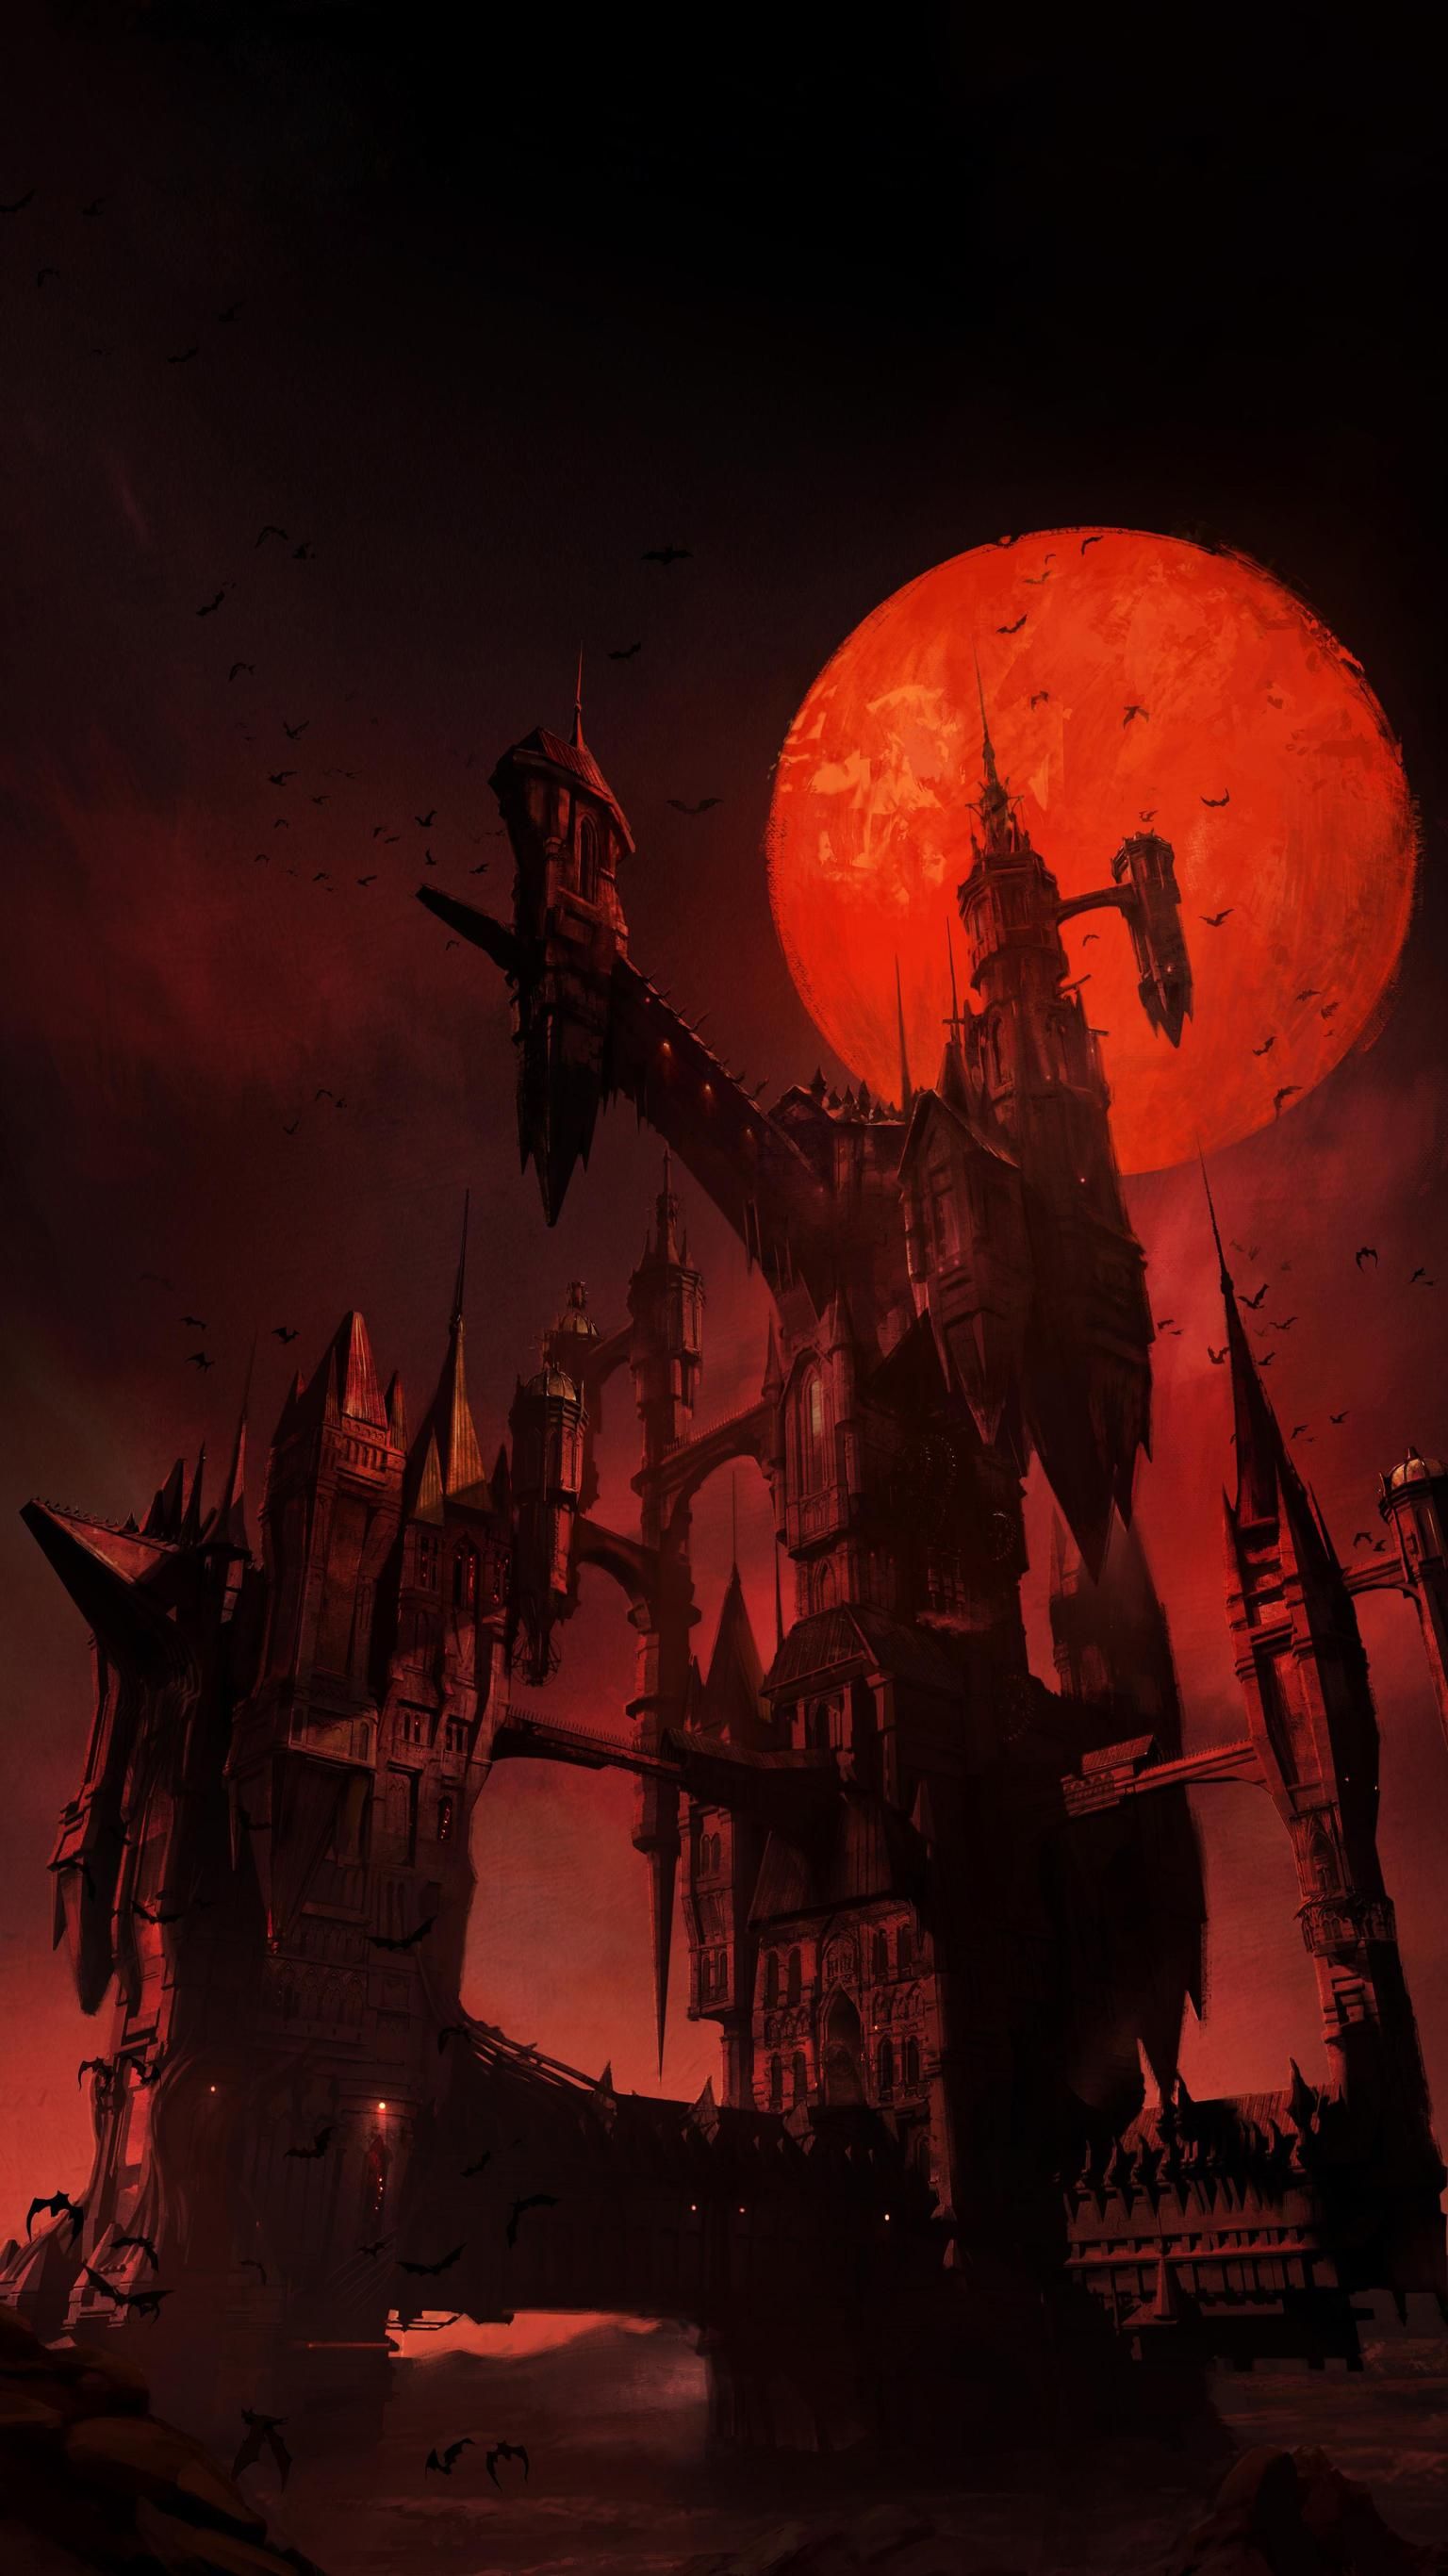 Castlevania: Symphony of the Night is a 2001 action-adventure game developed and published by Konami. - Netflix